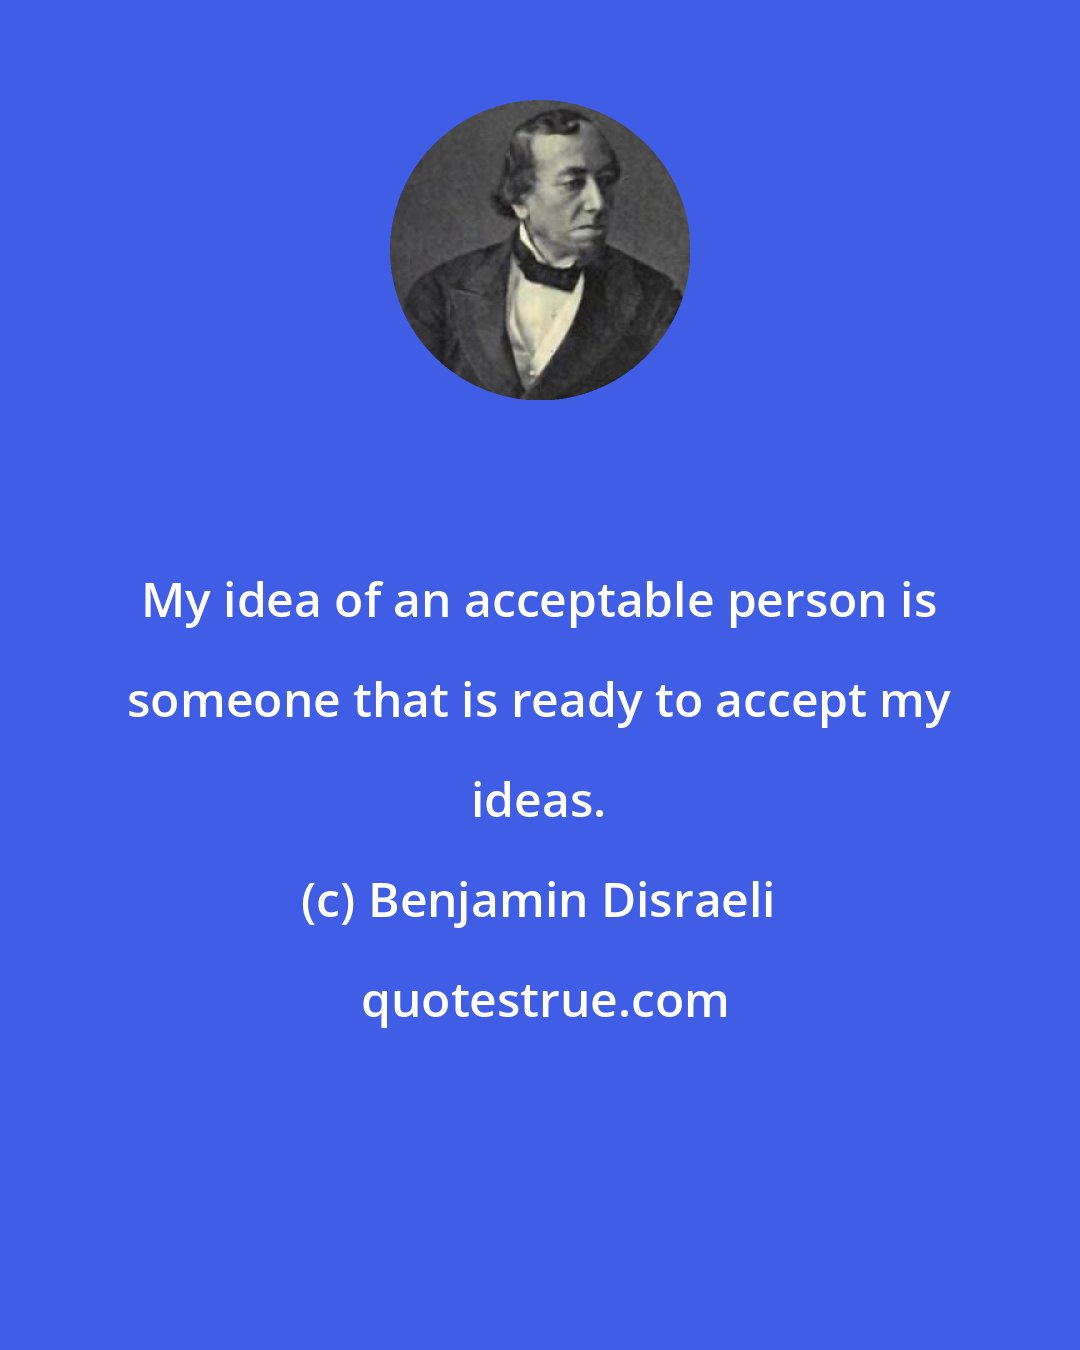 Benjamin Disraeli: My idea of an acceptable person is someone that is ready to accept my ideas.